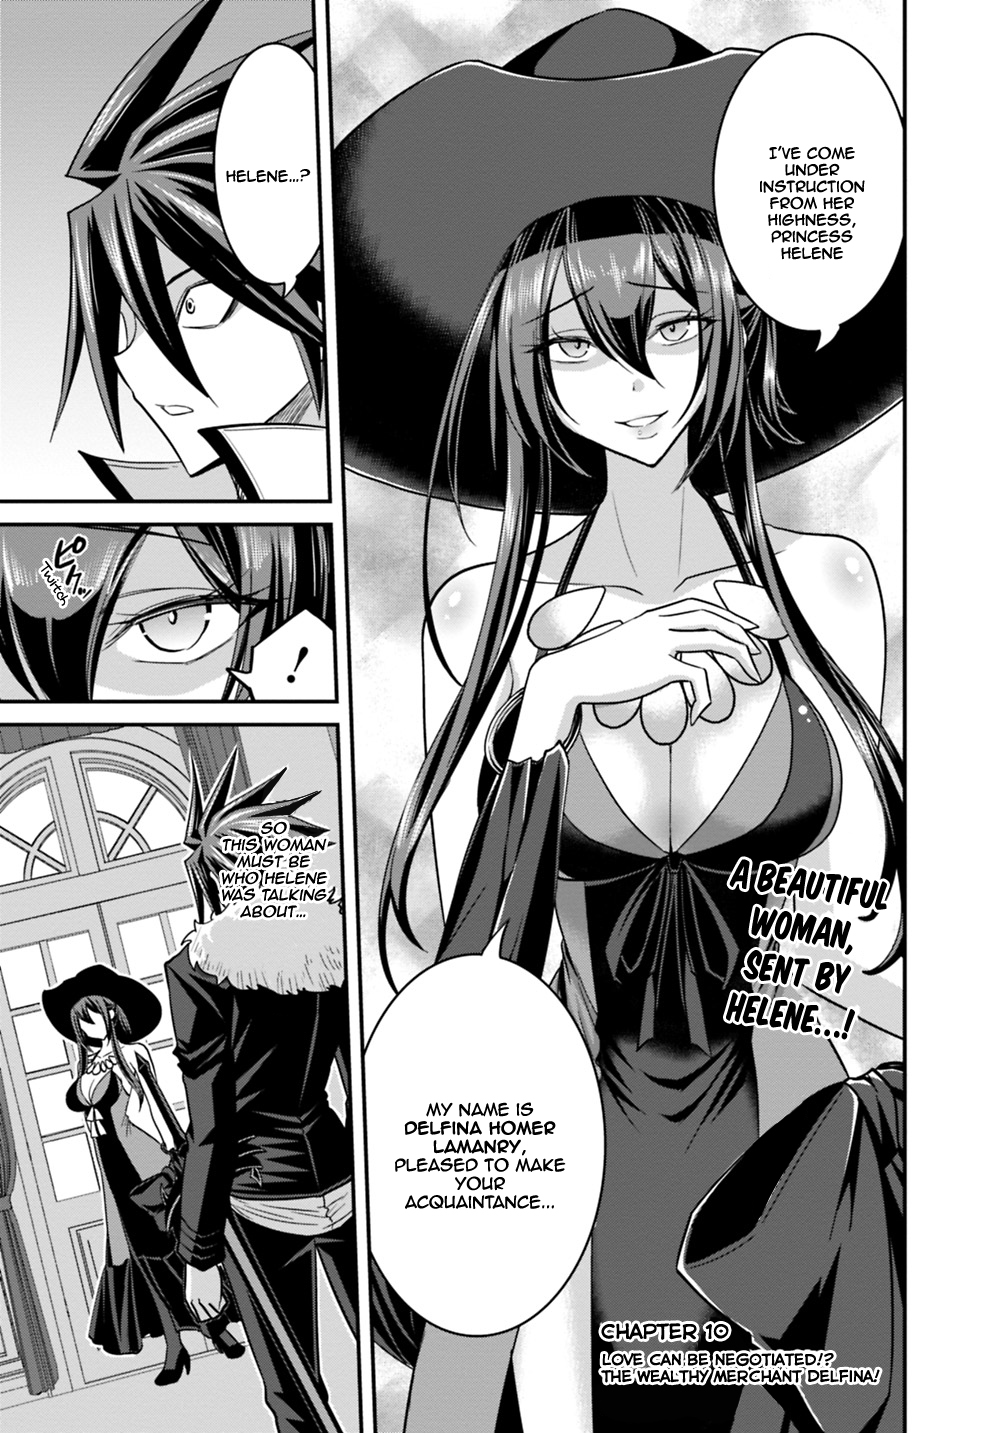 Kujibiki Tokushou Musou Harem-Ken Vol.3 Chapter 10.1: Love Can Be Negotiated!? The Whealthy Merchant Delfina! - Picture 2